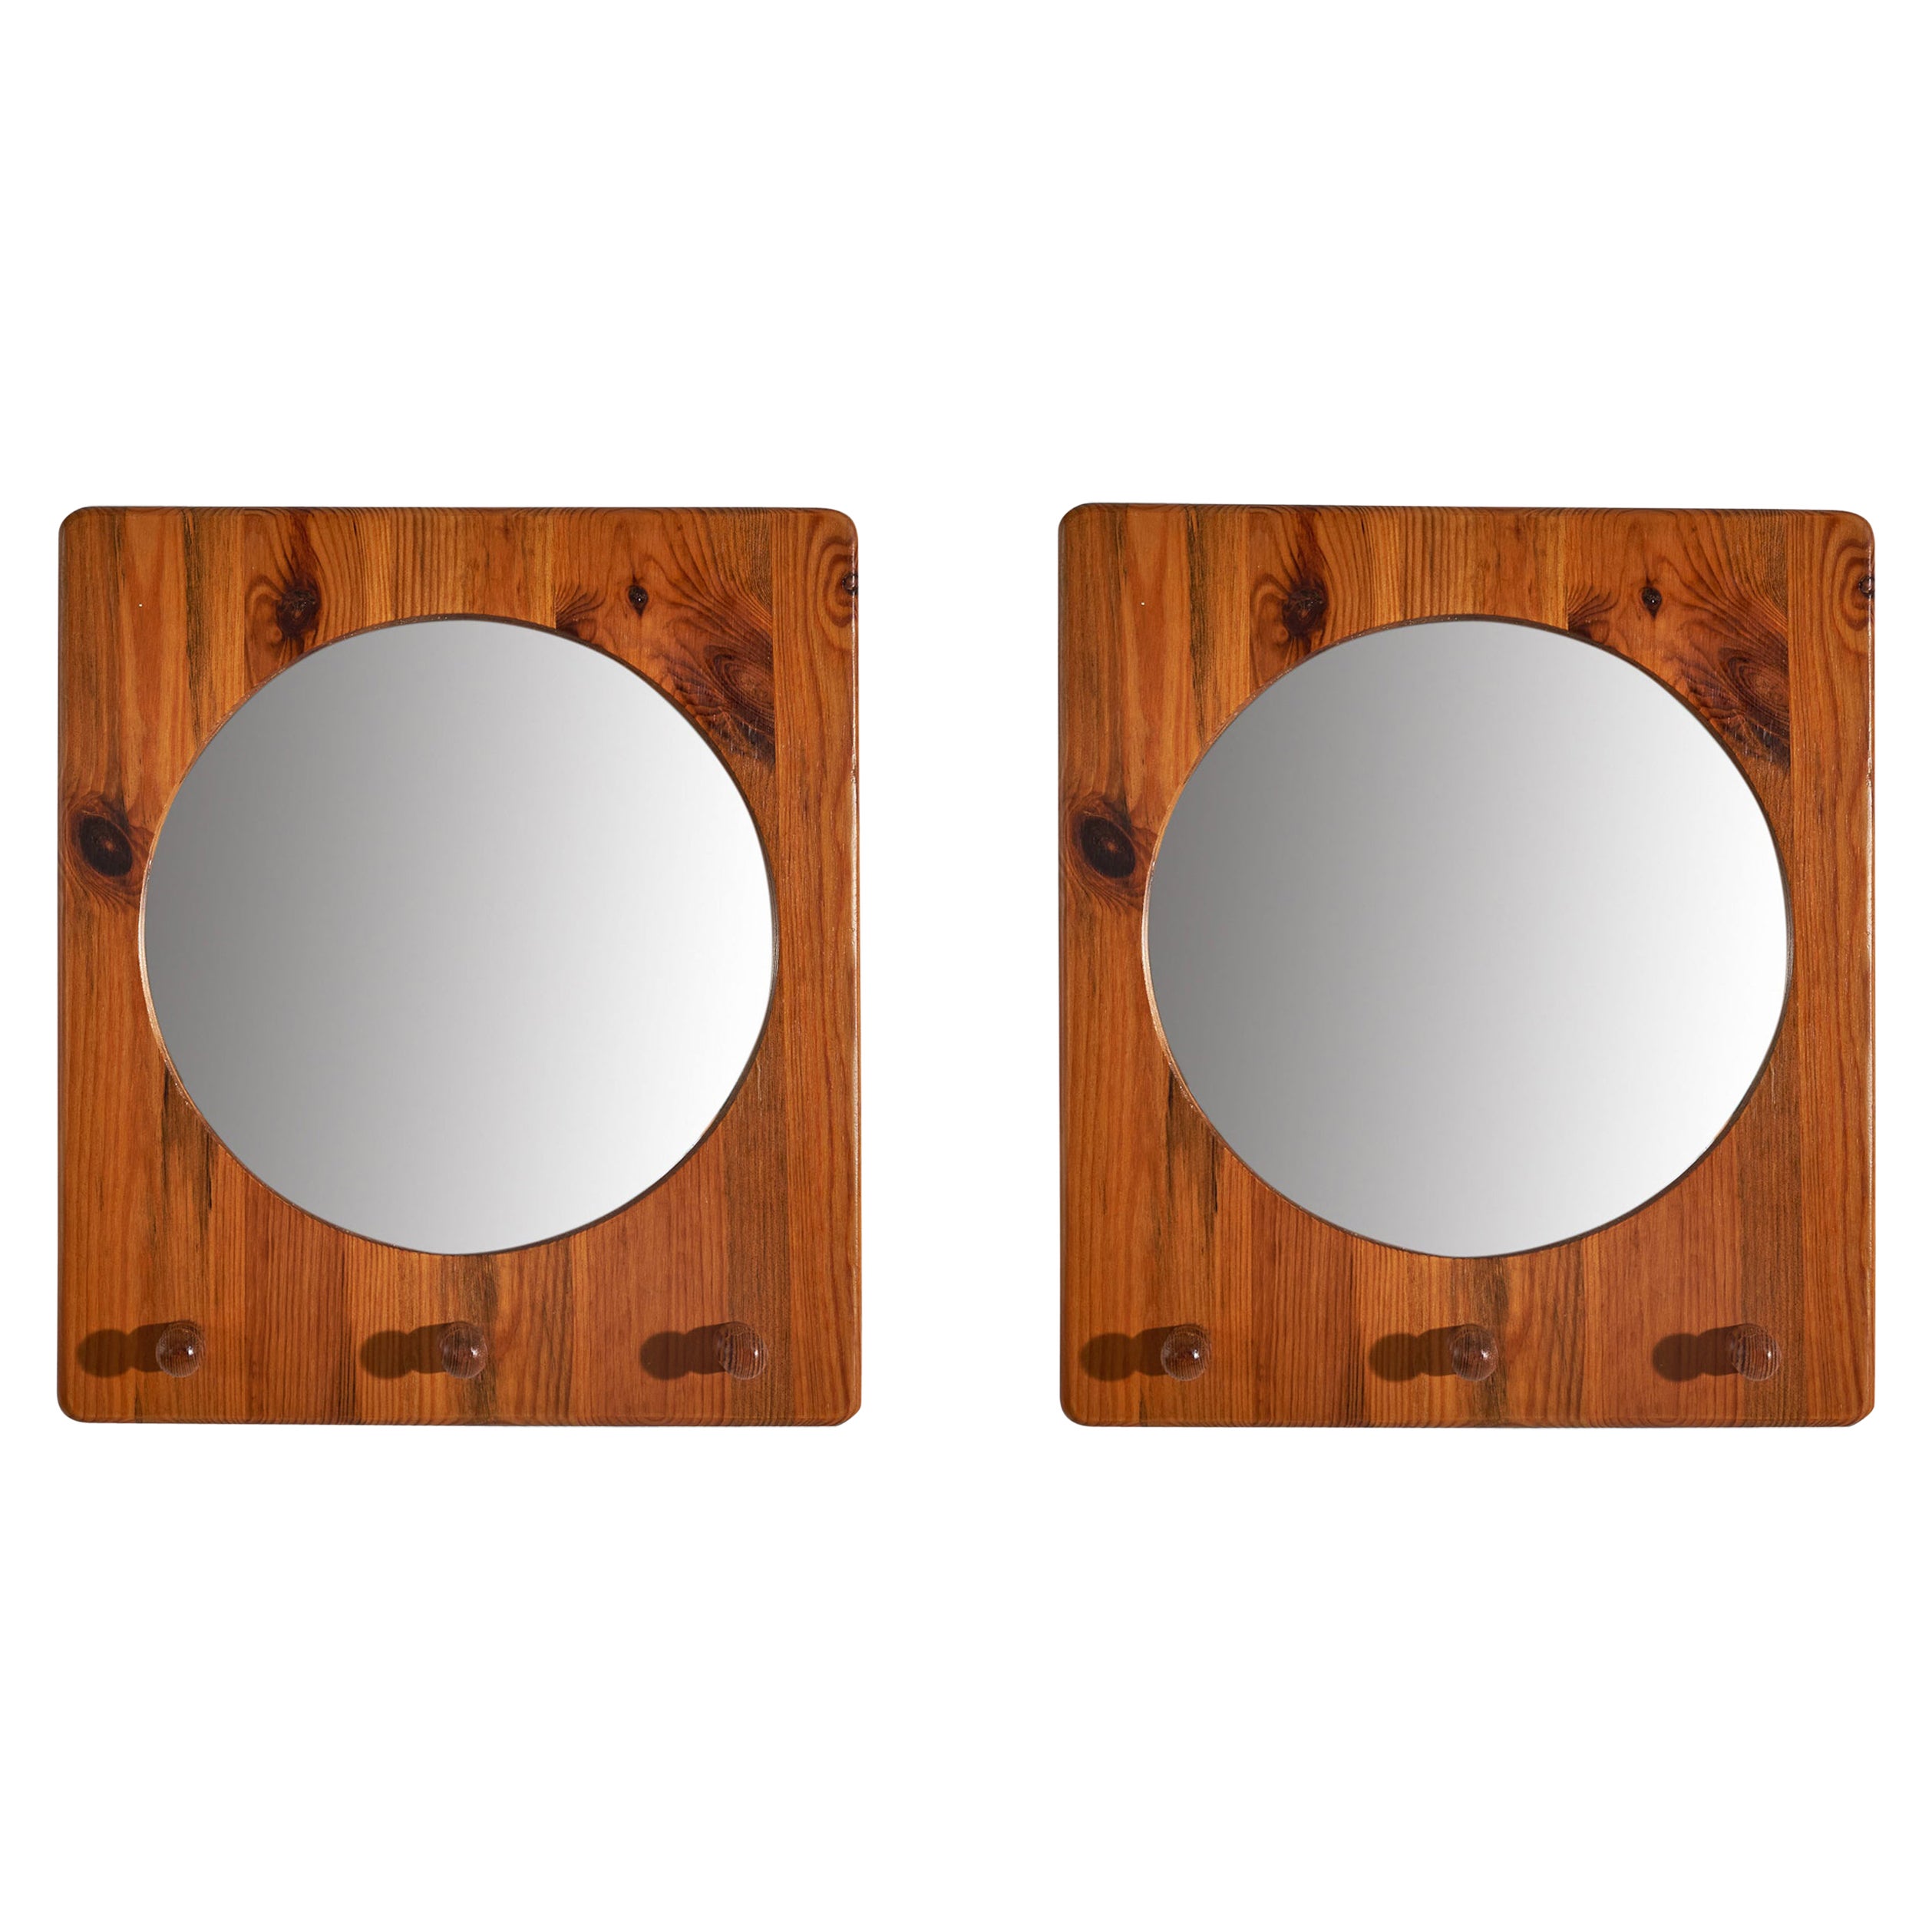 Stig Johnsson, Pair of Wall Mirrors, Pine, Sweden, 1970s For Sale